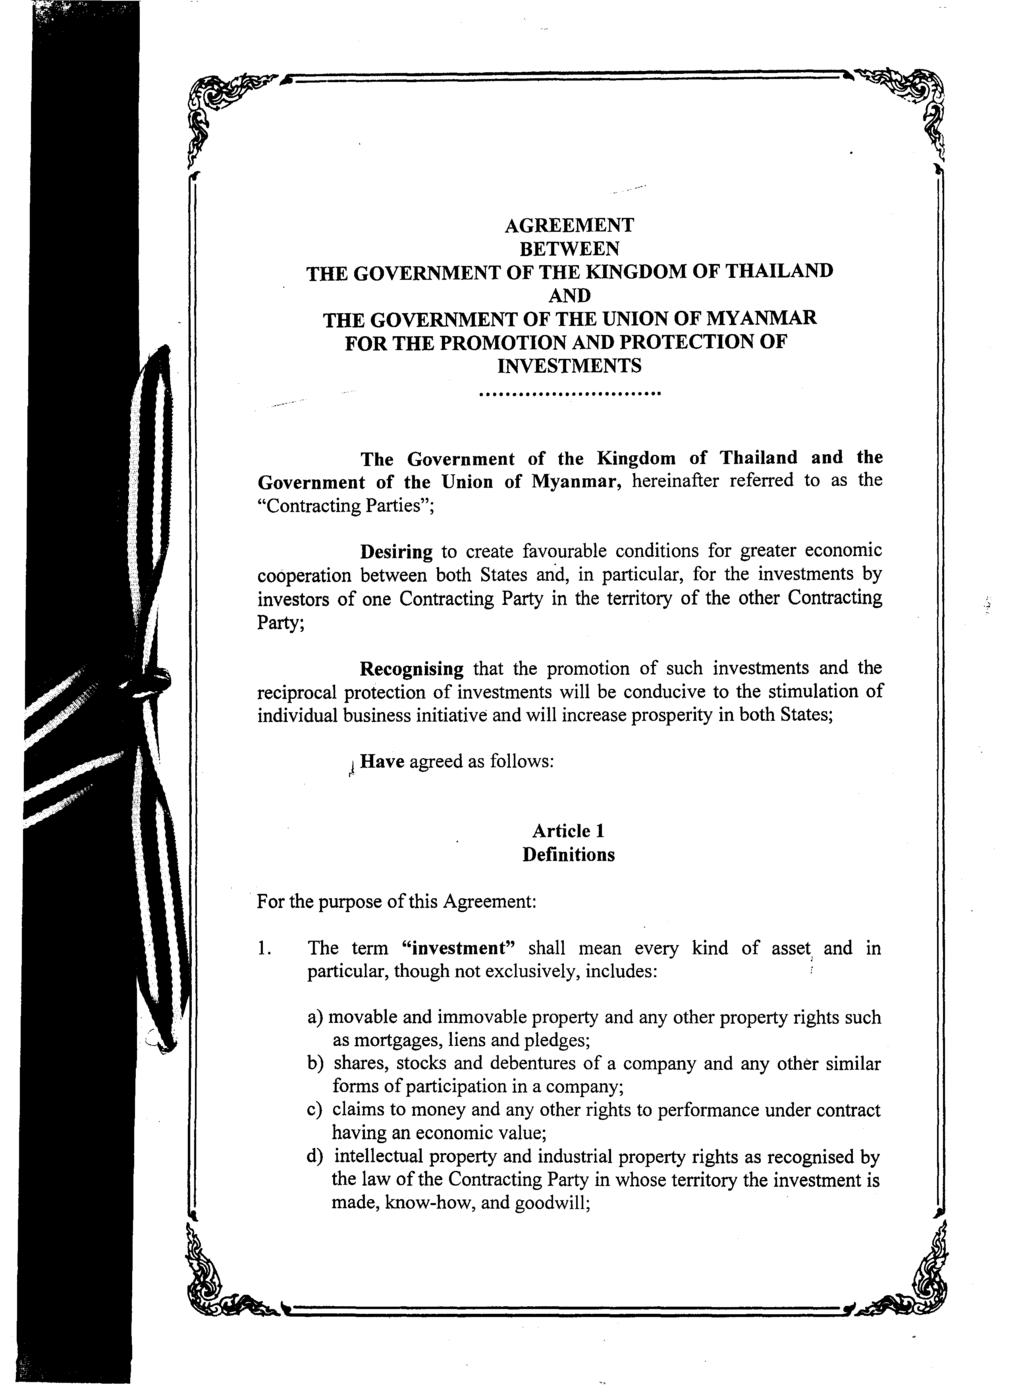 AGREEMENT BETWEEN THE GOVERNMENT OF THE KINGDOM OF THAILAND AND THE GOVERNMENT OF THE UNION OF MY ANMAR FOR THE PROMOTION AND PROTECTION OF INVESTMENTS The Government of the Kingdom of Thailand and